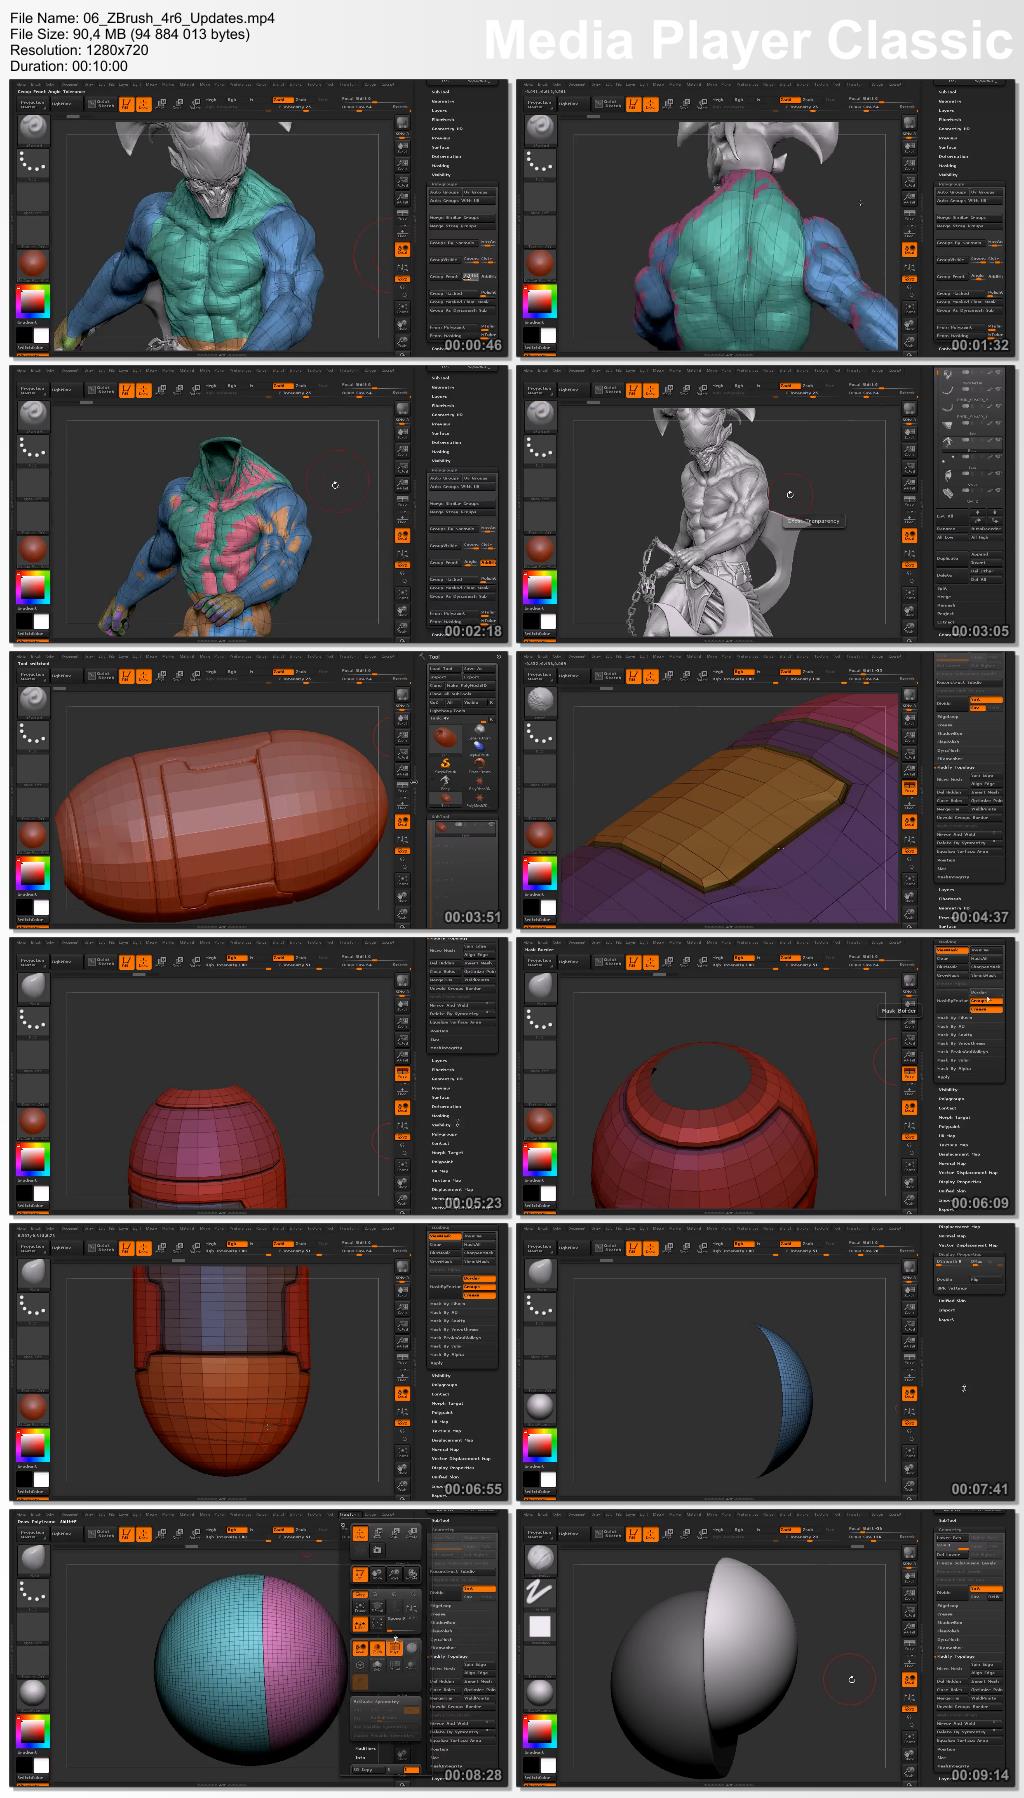 Dixxl Tuxxs - What's New in ZBrush 4R6